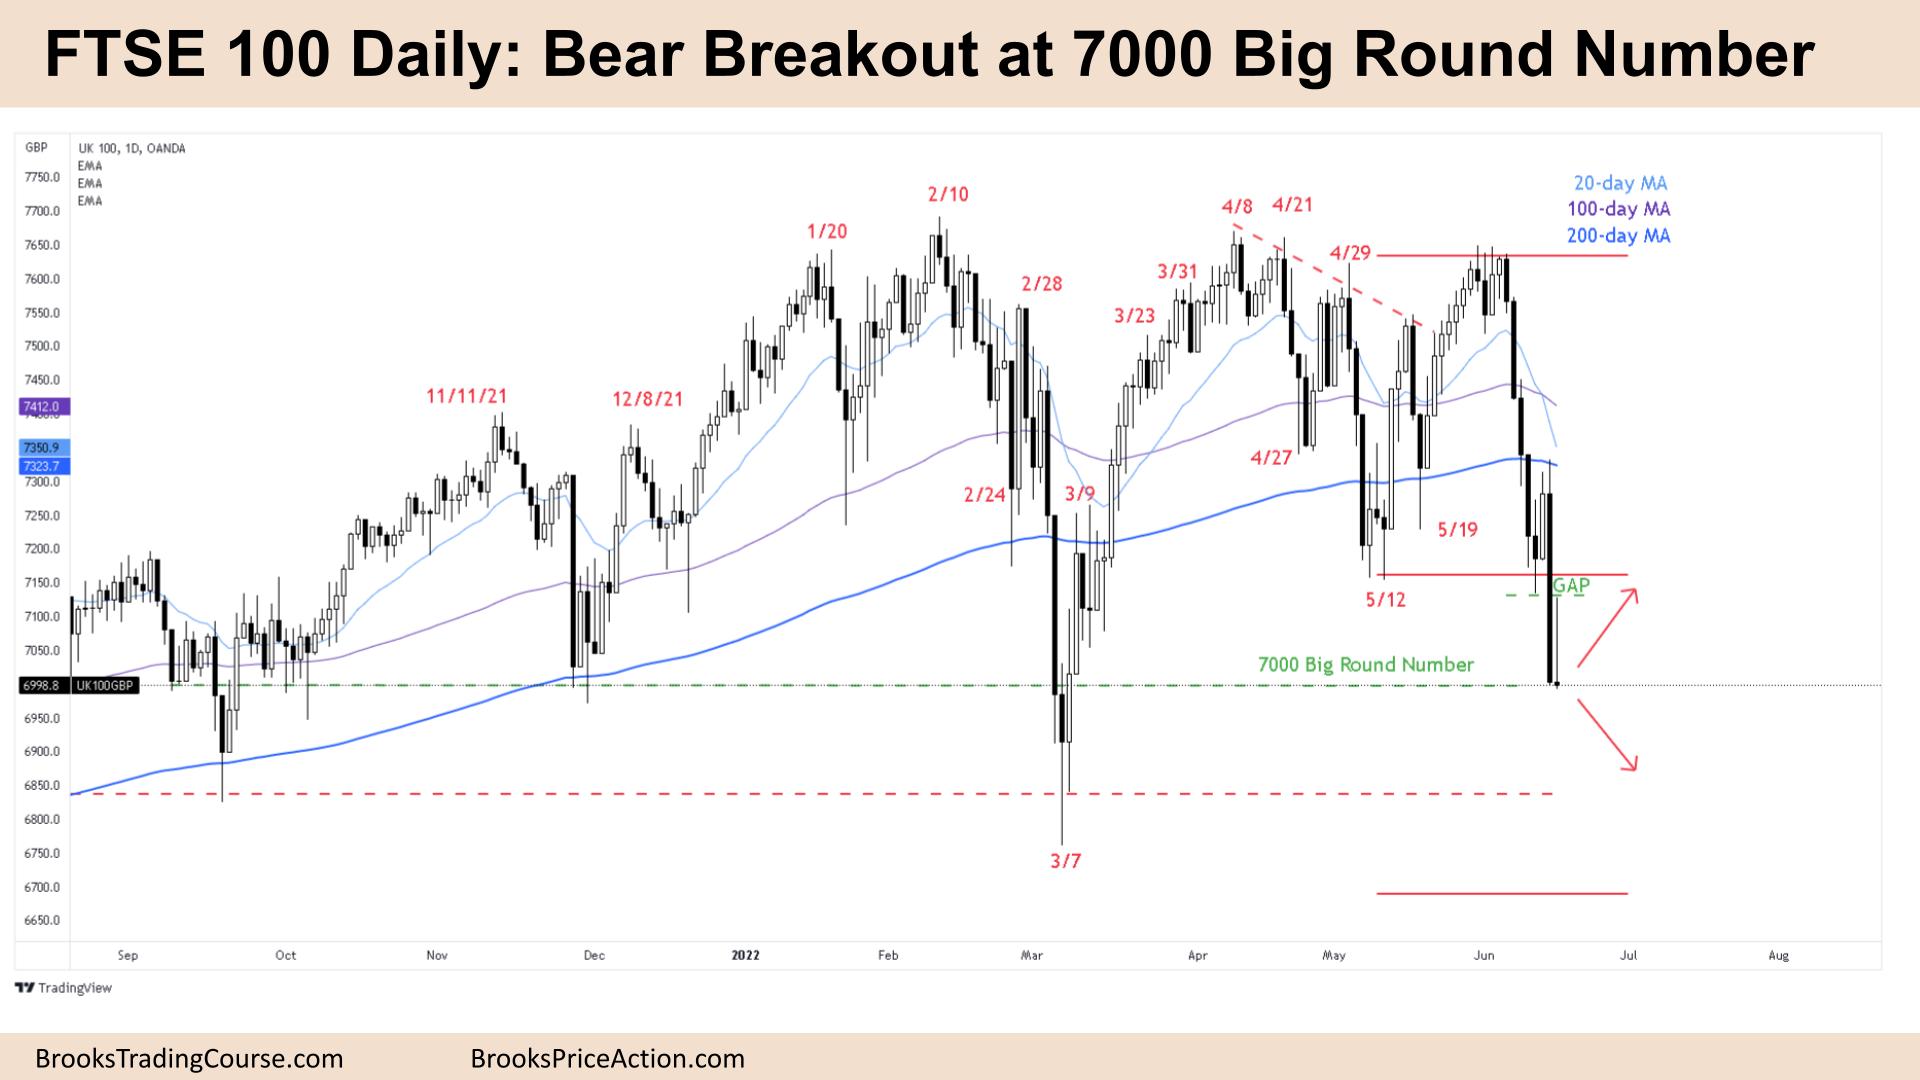 FTSE Daily Chart Bear Breakout at 7000 Big Round Number